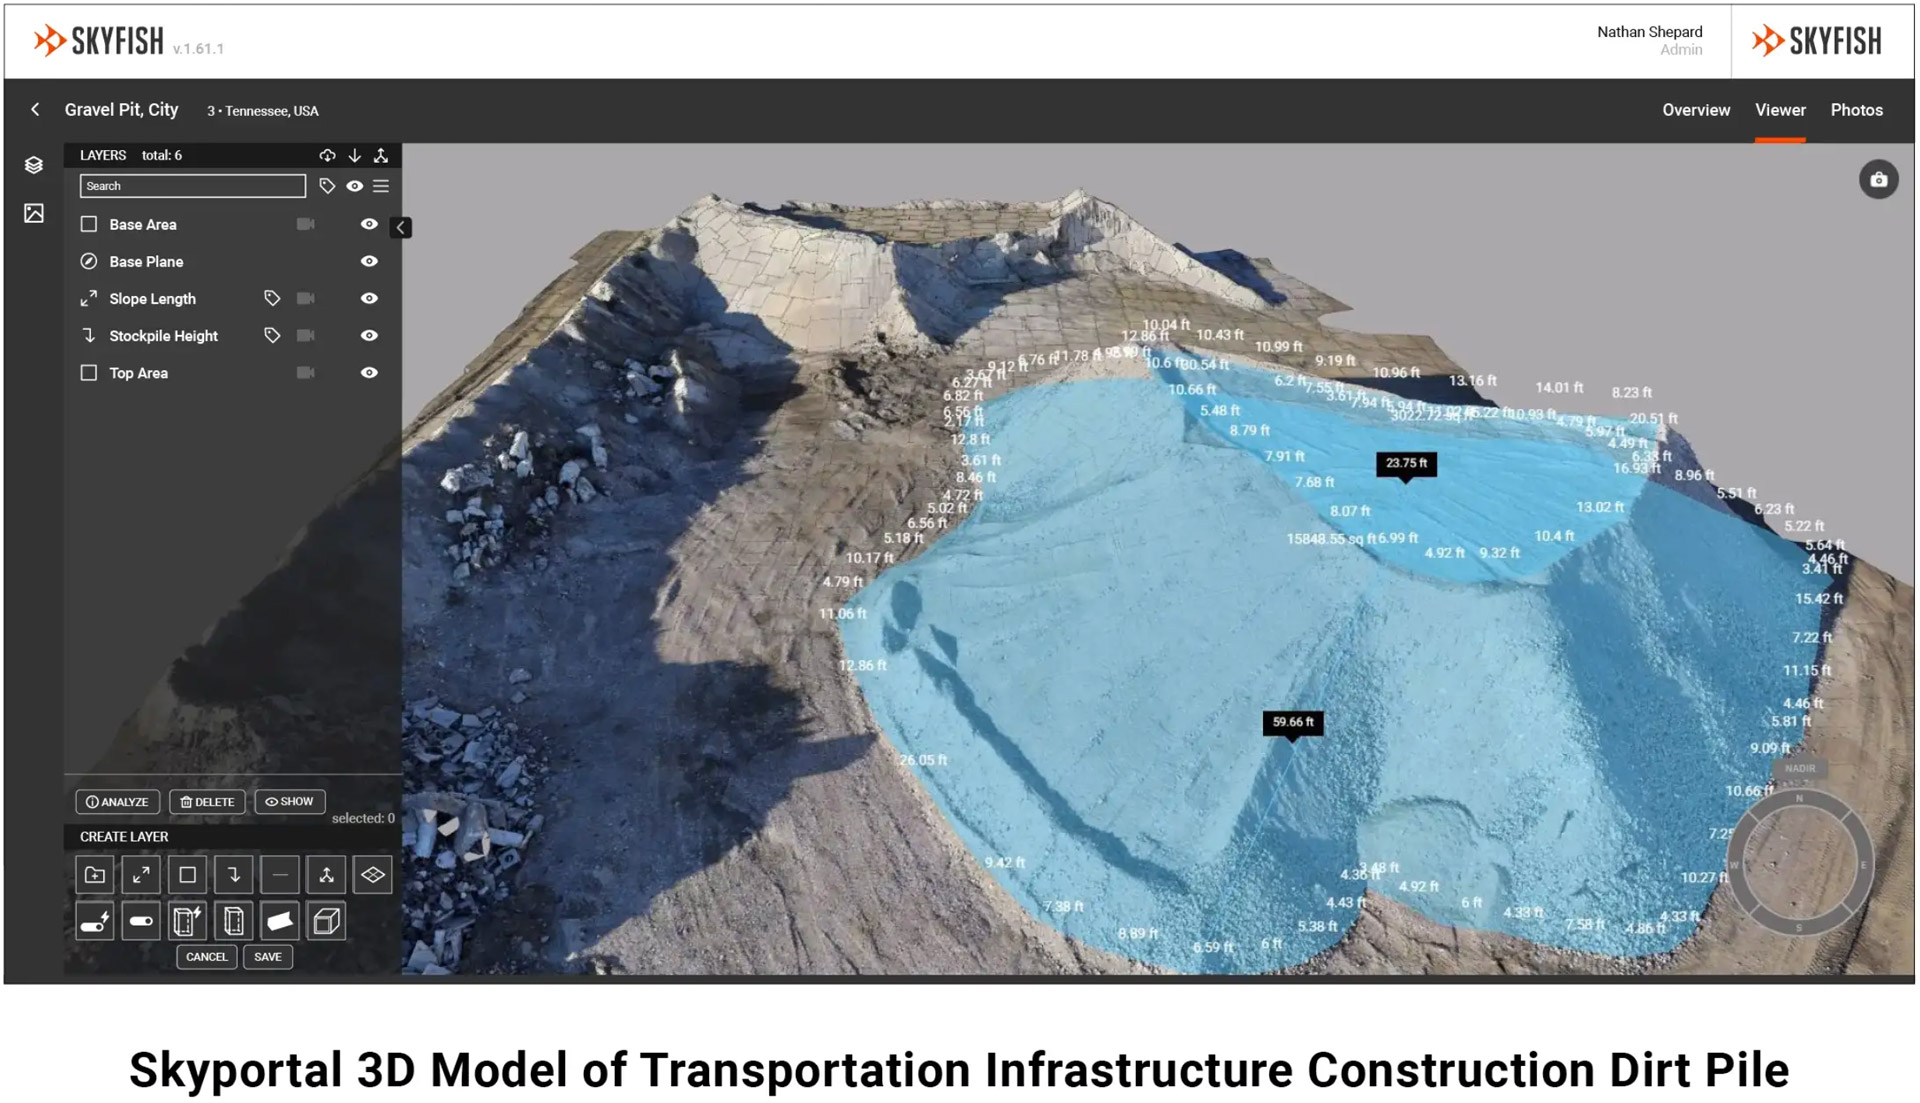 Precision 3D Modeling of Transportation Infrastructure Using Drones